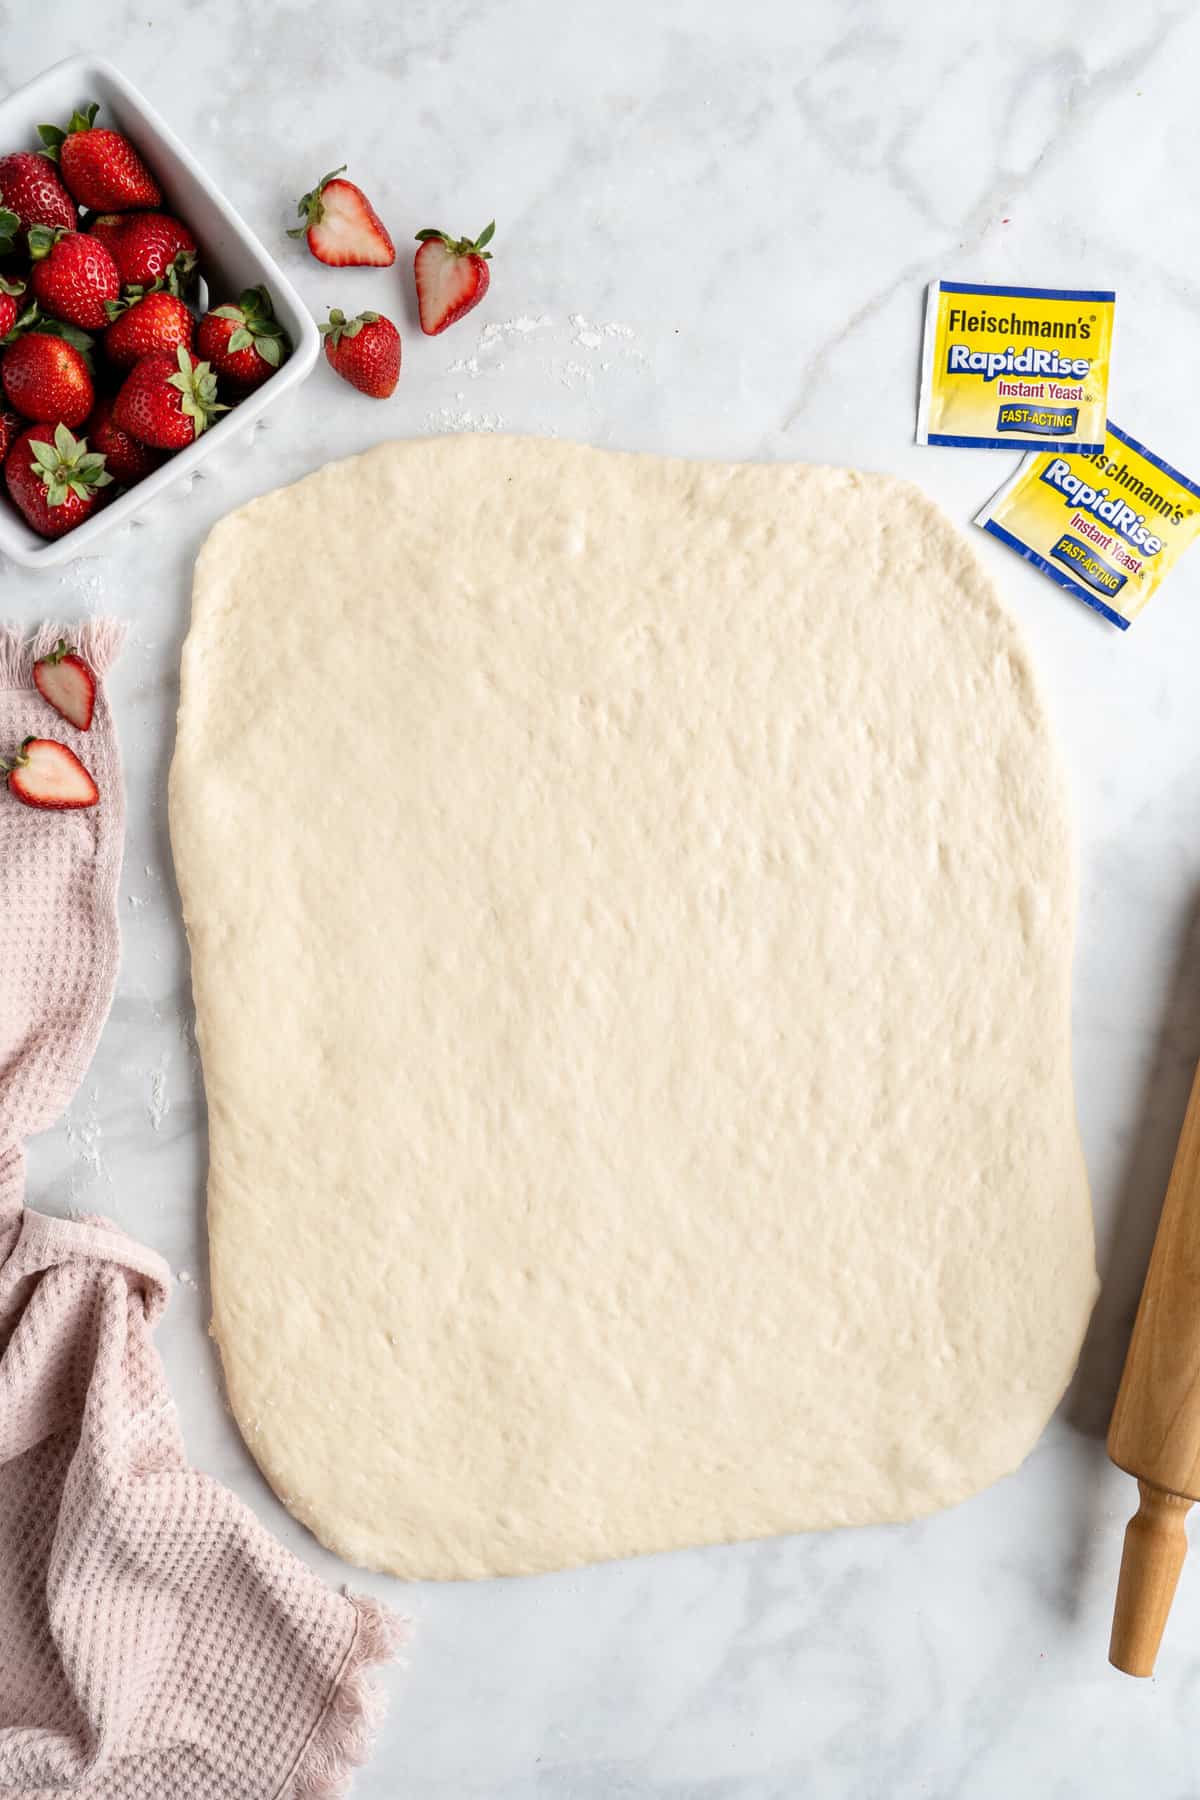 Rectangle of cinnamon roll dough on a white counter.